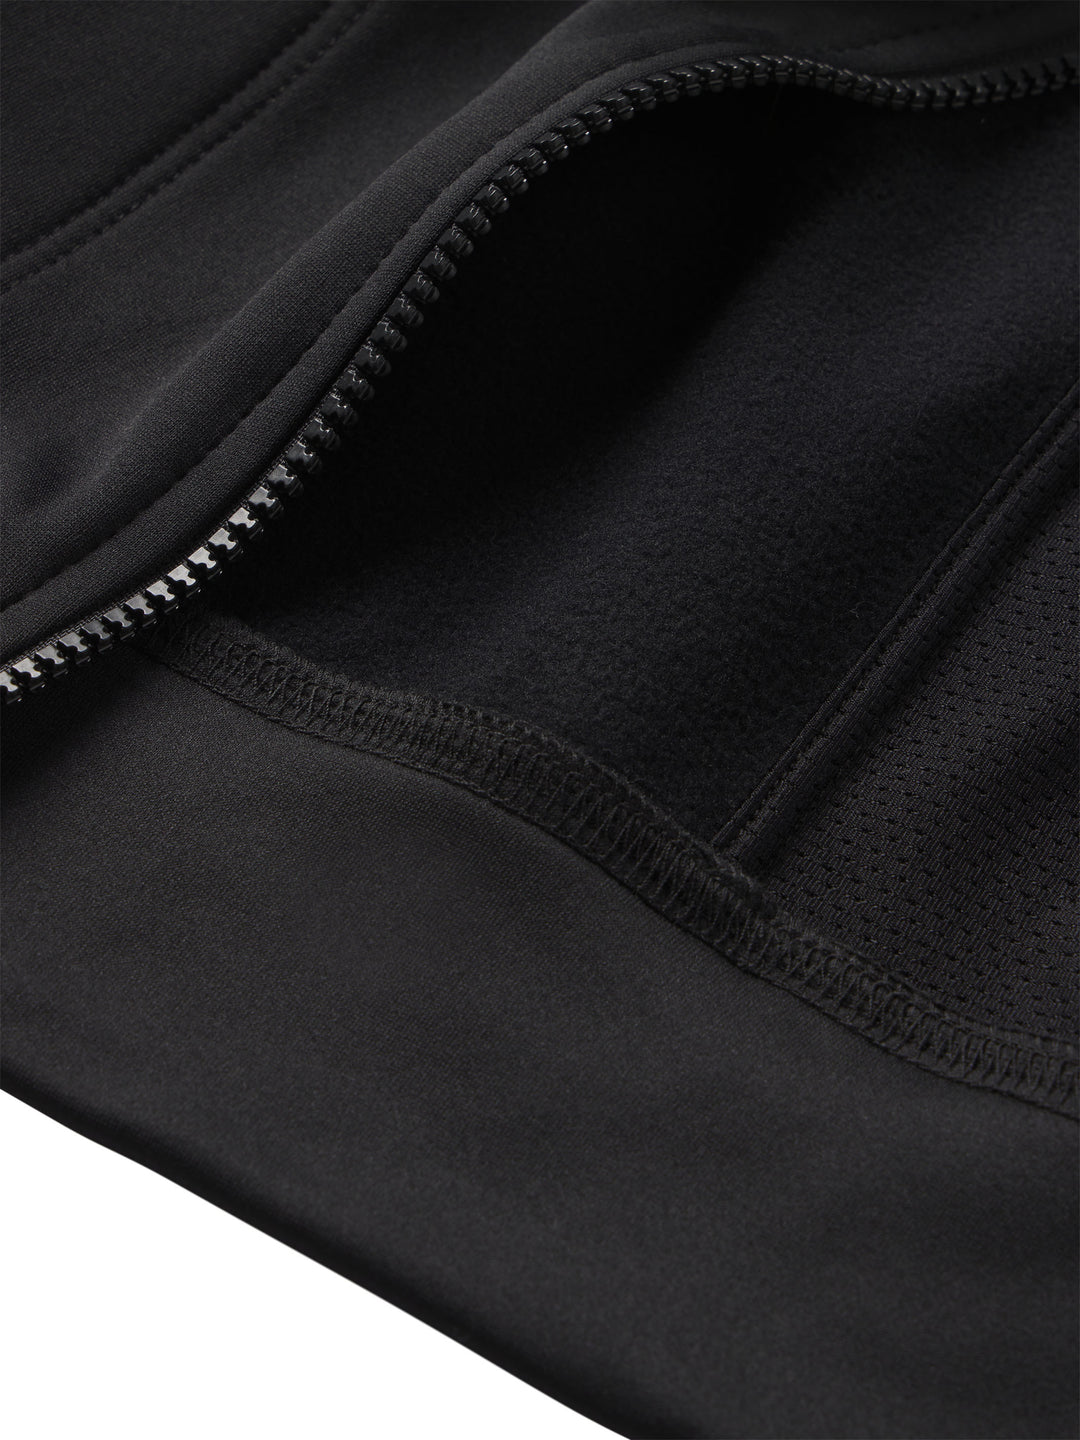 Close-up of the intricate stitching and fabric texture on a PB5star black Performance Full Zip Hoodie, highlighting the garment's quality.